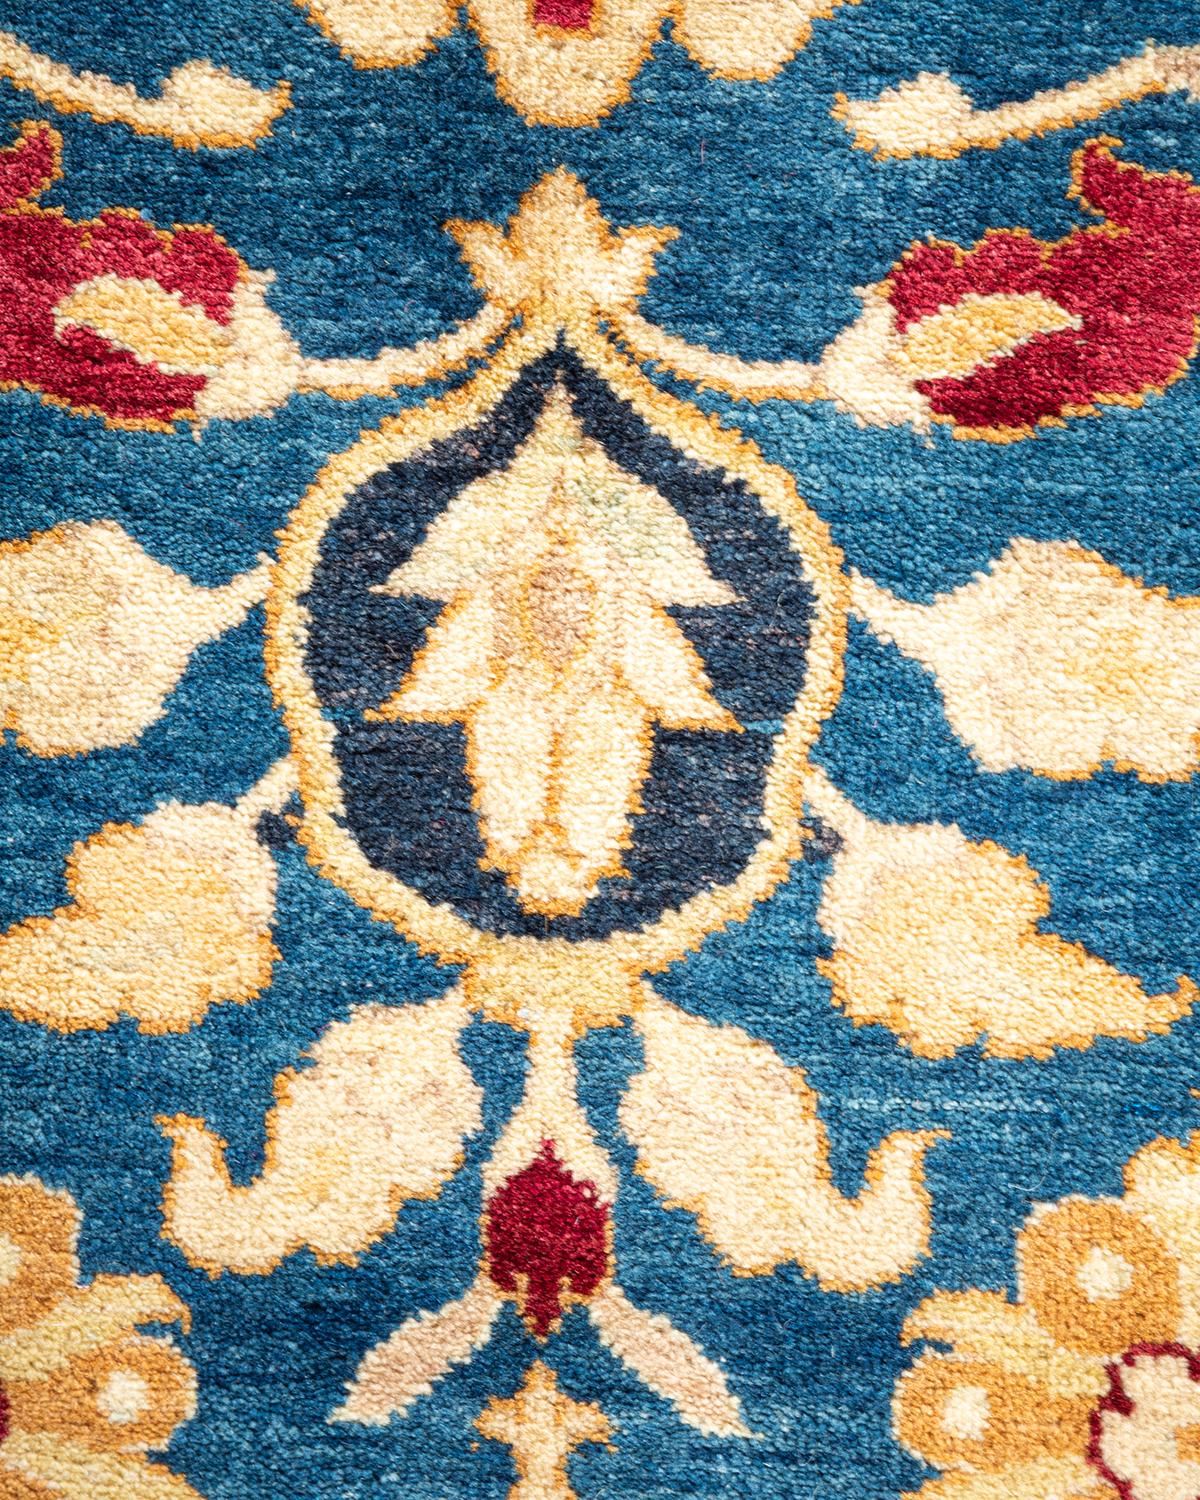 Pakistani One-of-a-kind Hand Knotted Traditional Floral Mogul Blue Area Rug